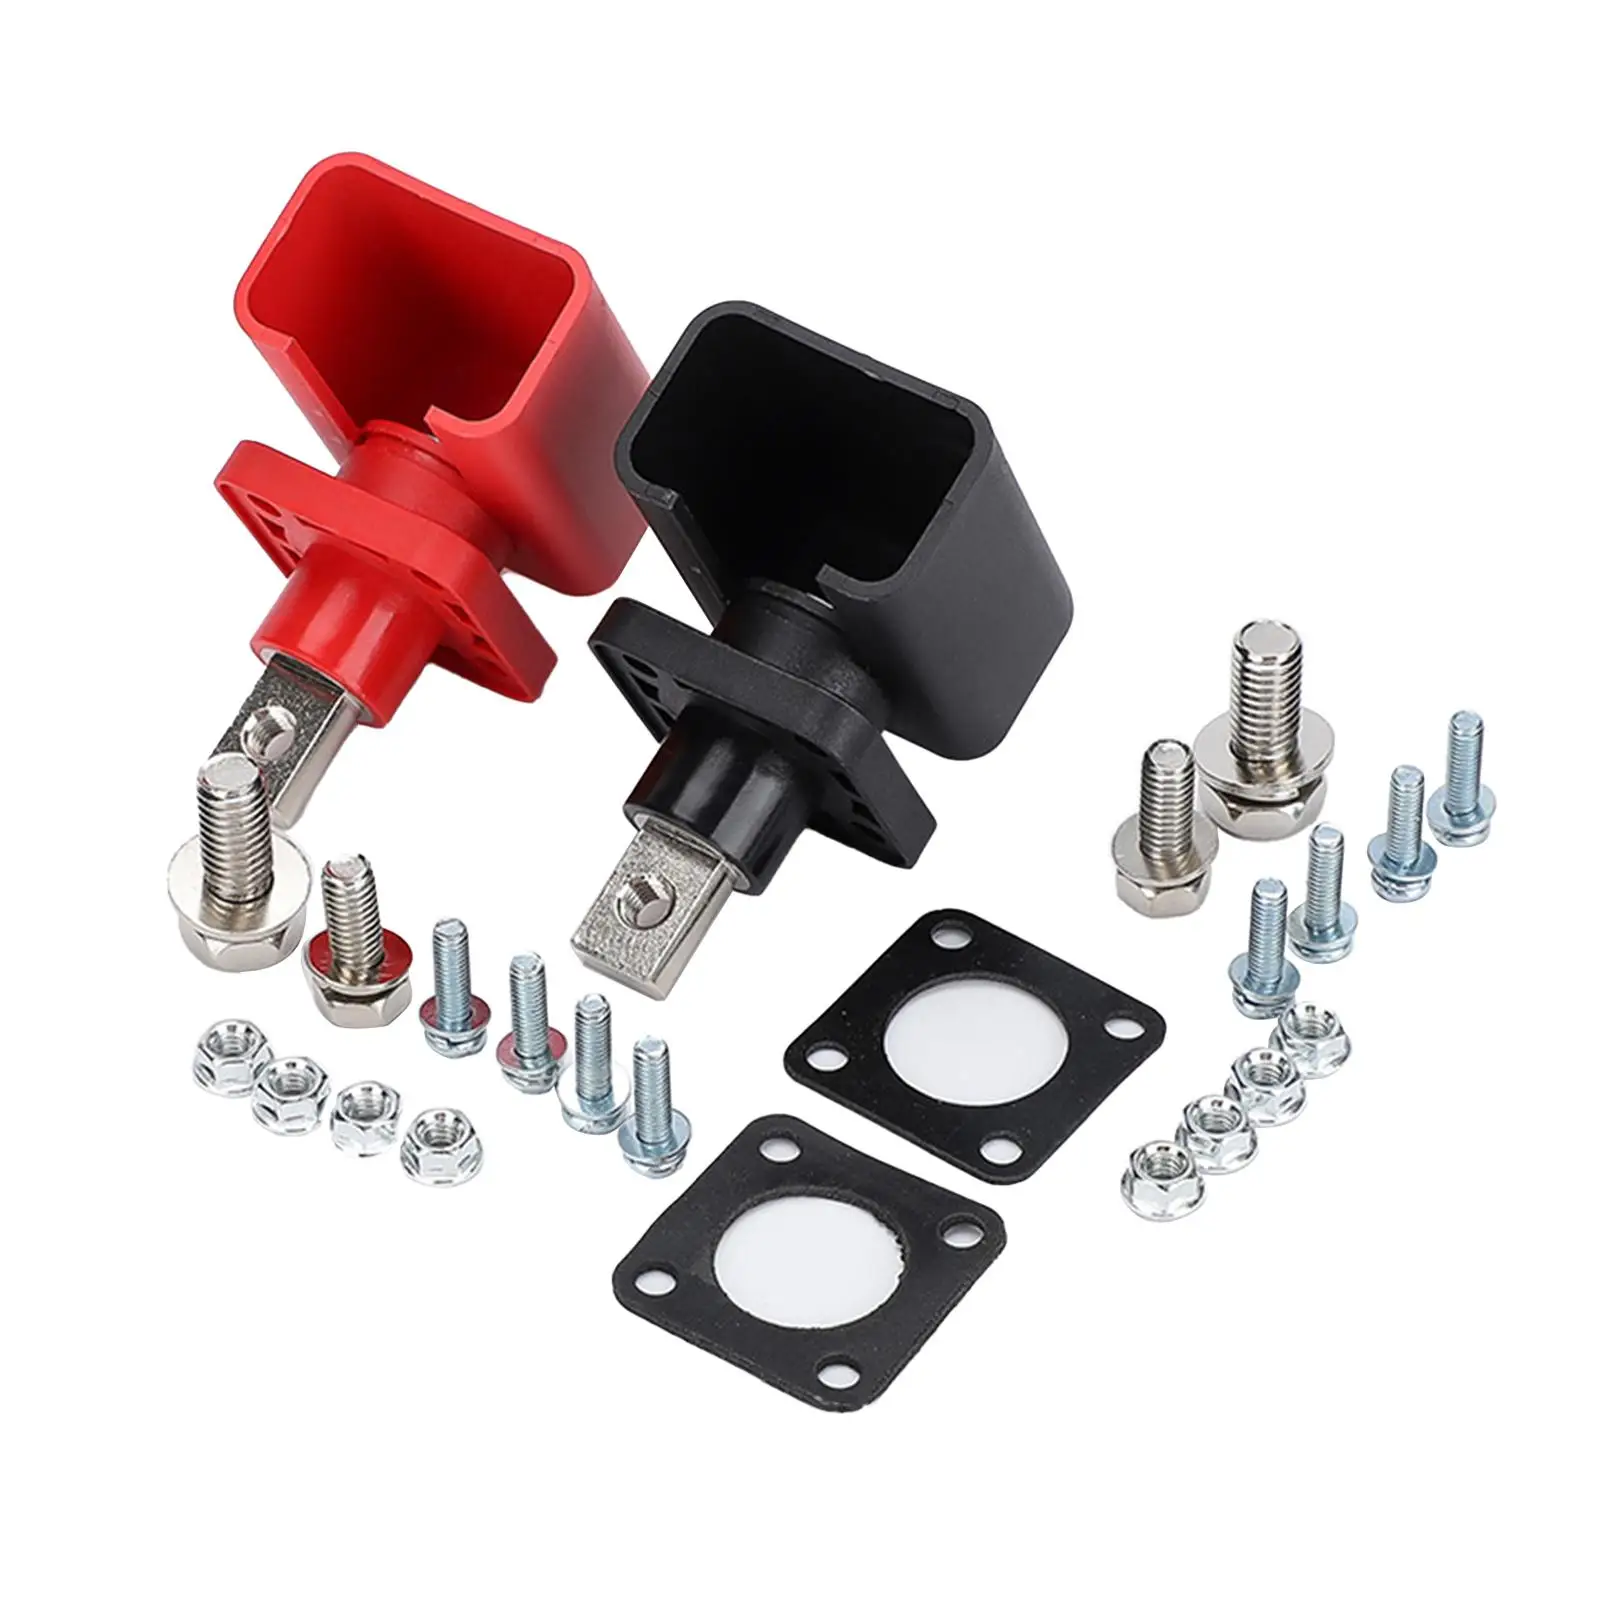 2Pcs Battery Terminal Connector Quick Disconnect Disconnect Tool Copper Convenient Installation Lithium for Truck Boat ATV Car